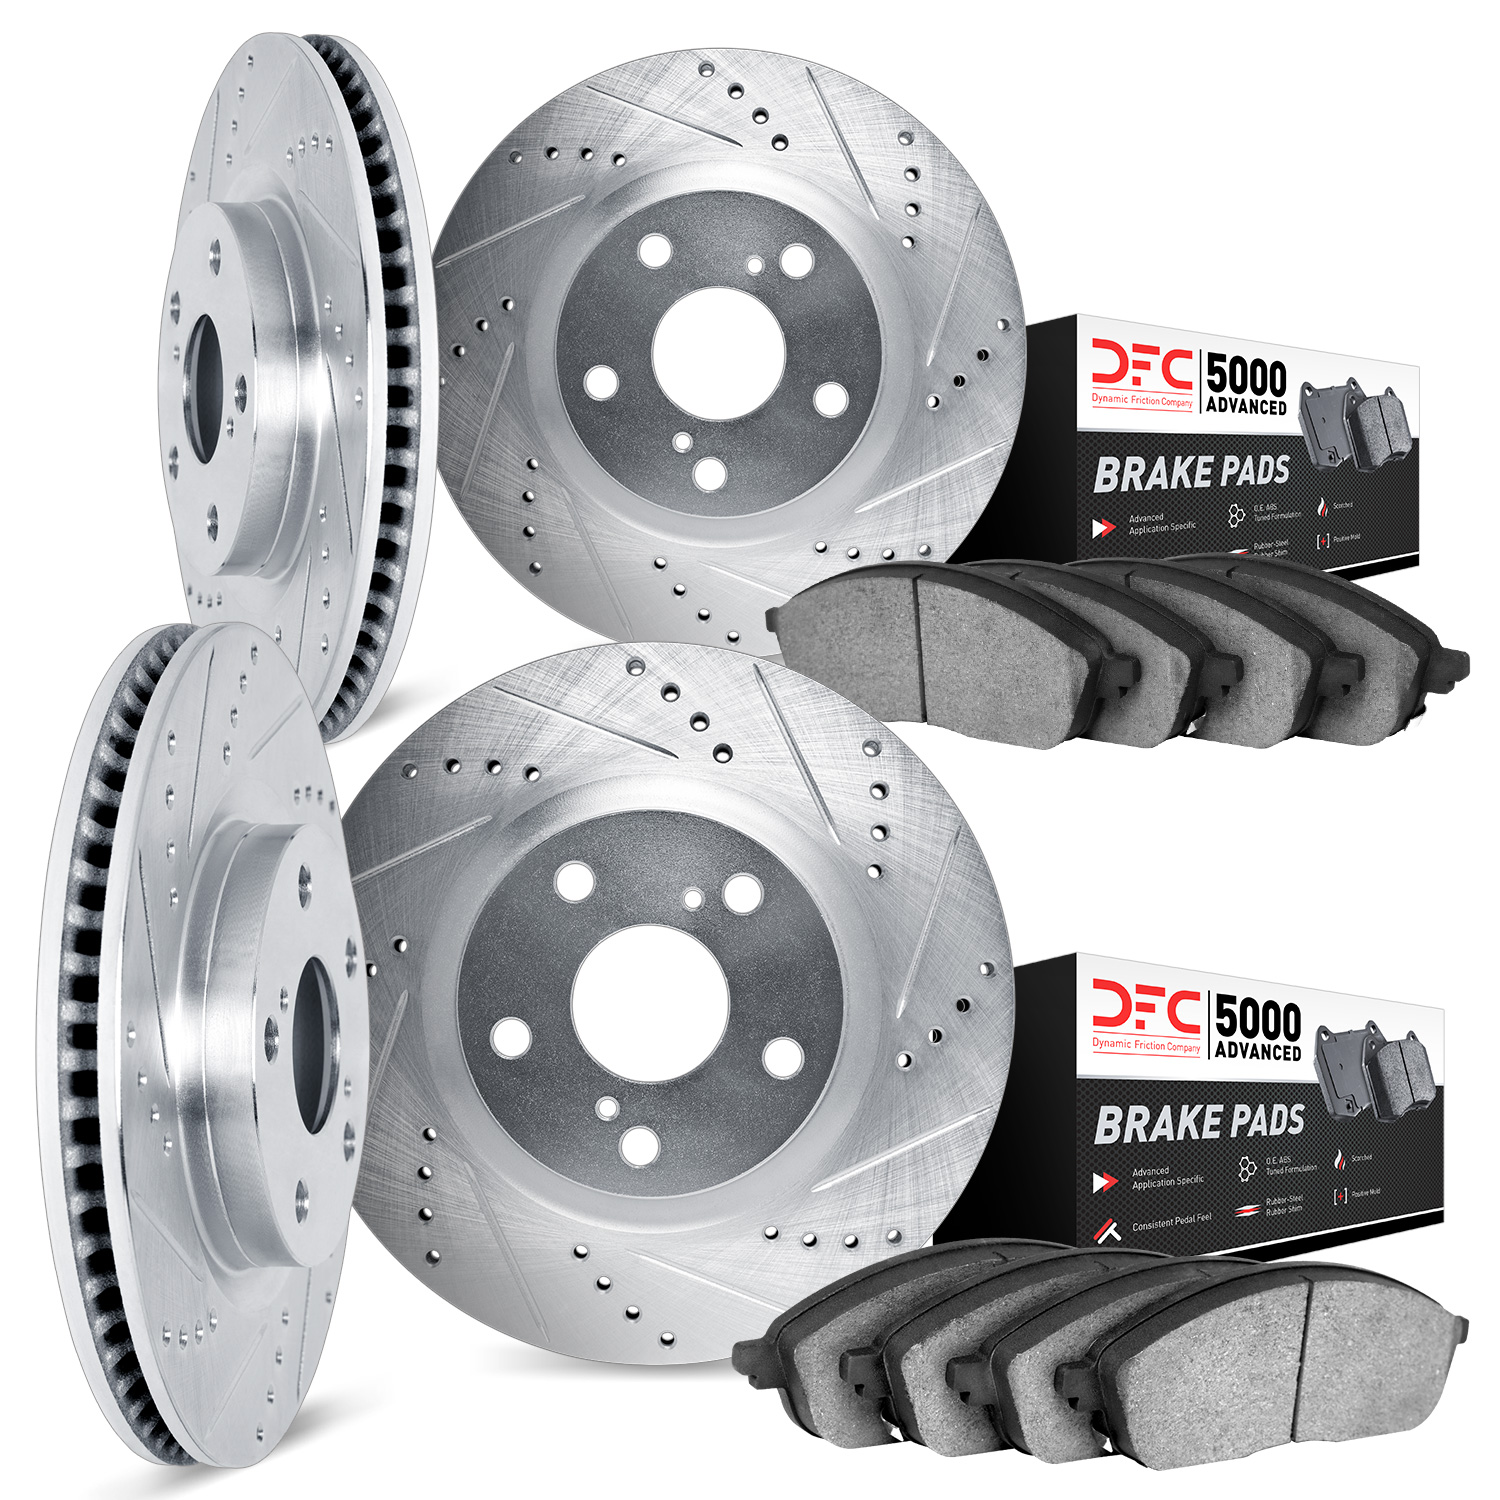 7504-31027 Drilled/Slotted Brake Rotors w/5000 Advanced Brake Pads Kit [Silver], 2010-2015 BMW, Position: Front and Rear